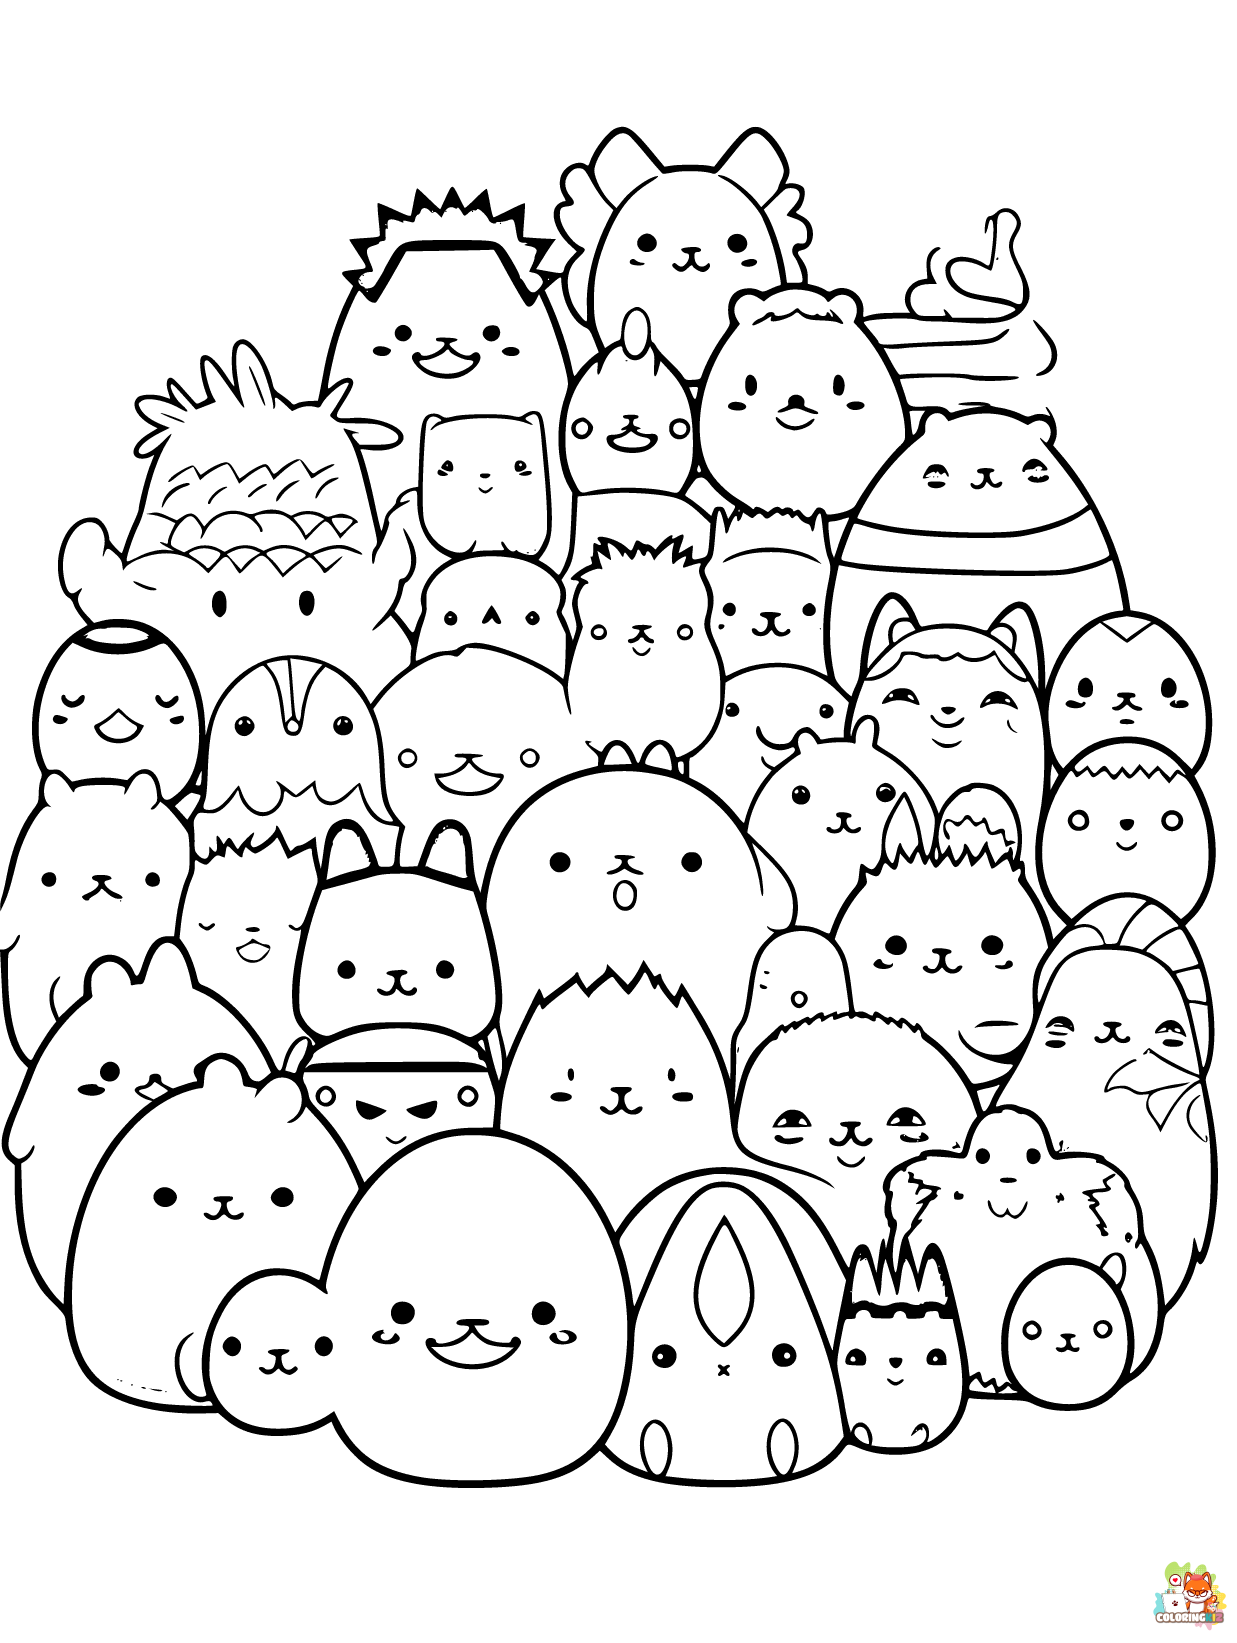 Squishmallows coloring pages printable free 2